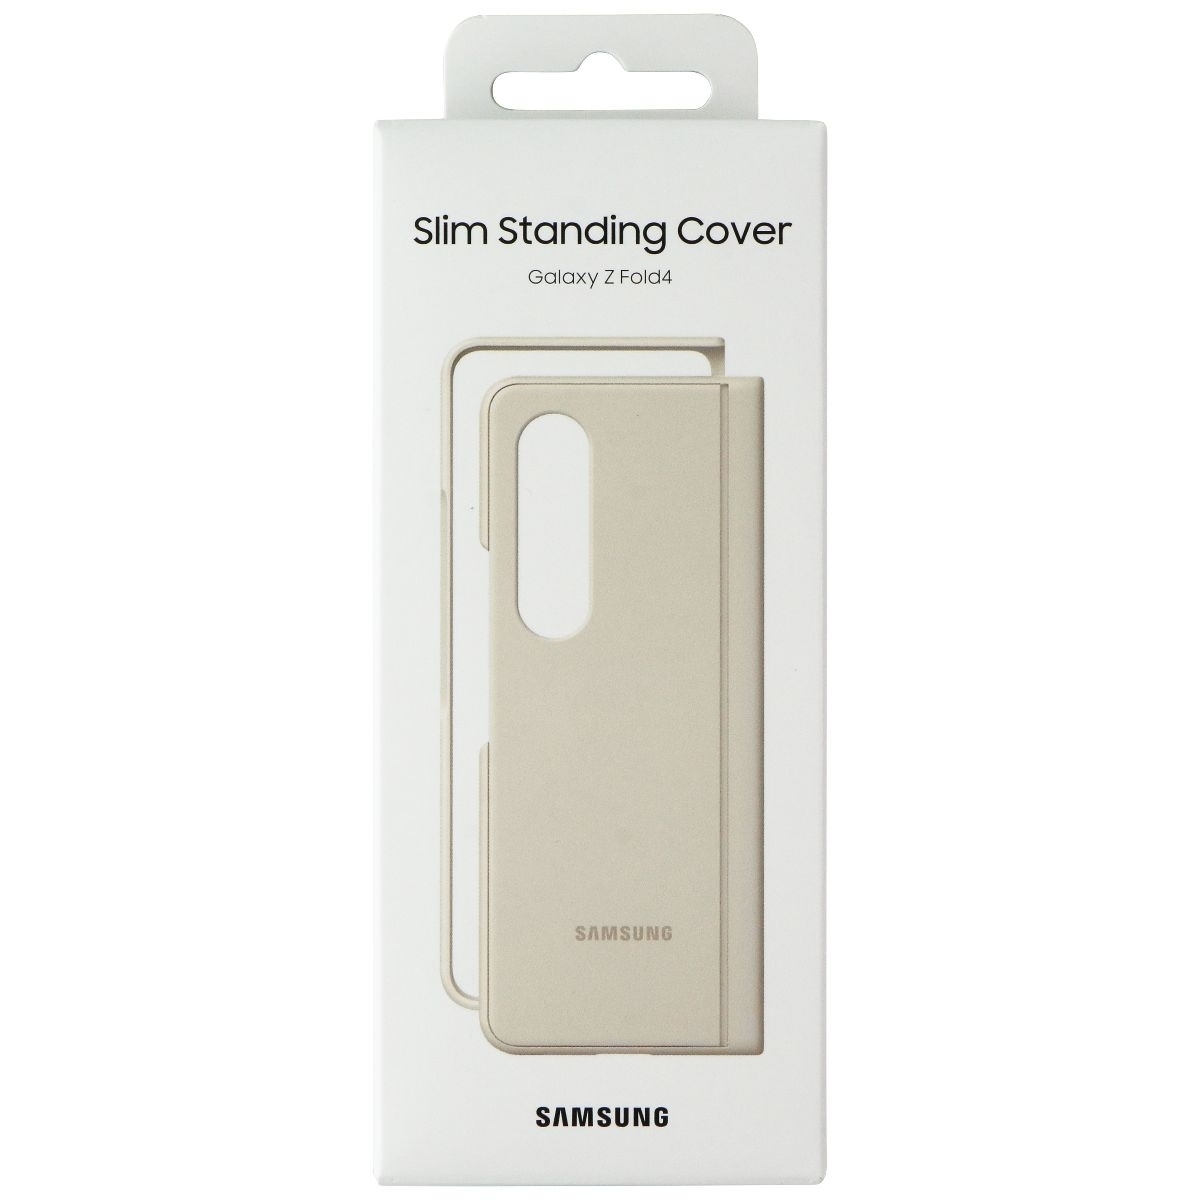 Samsung Official Slim Standing Cover For Galaxy Z Fold4 - Sand